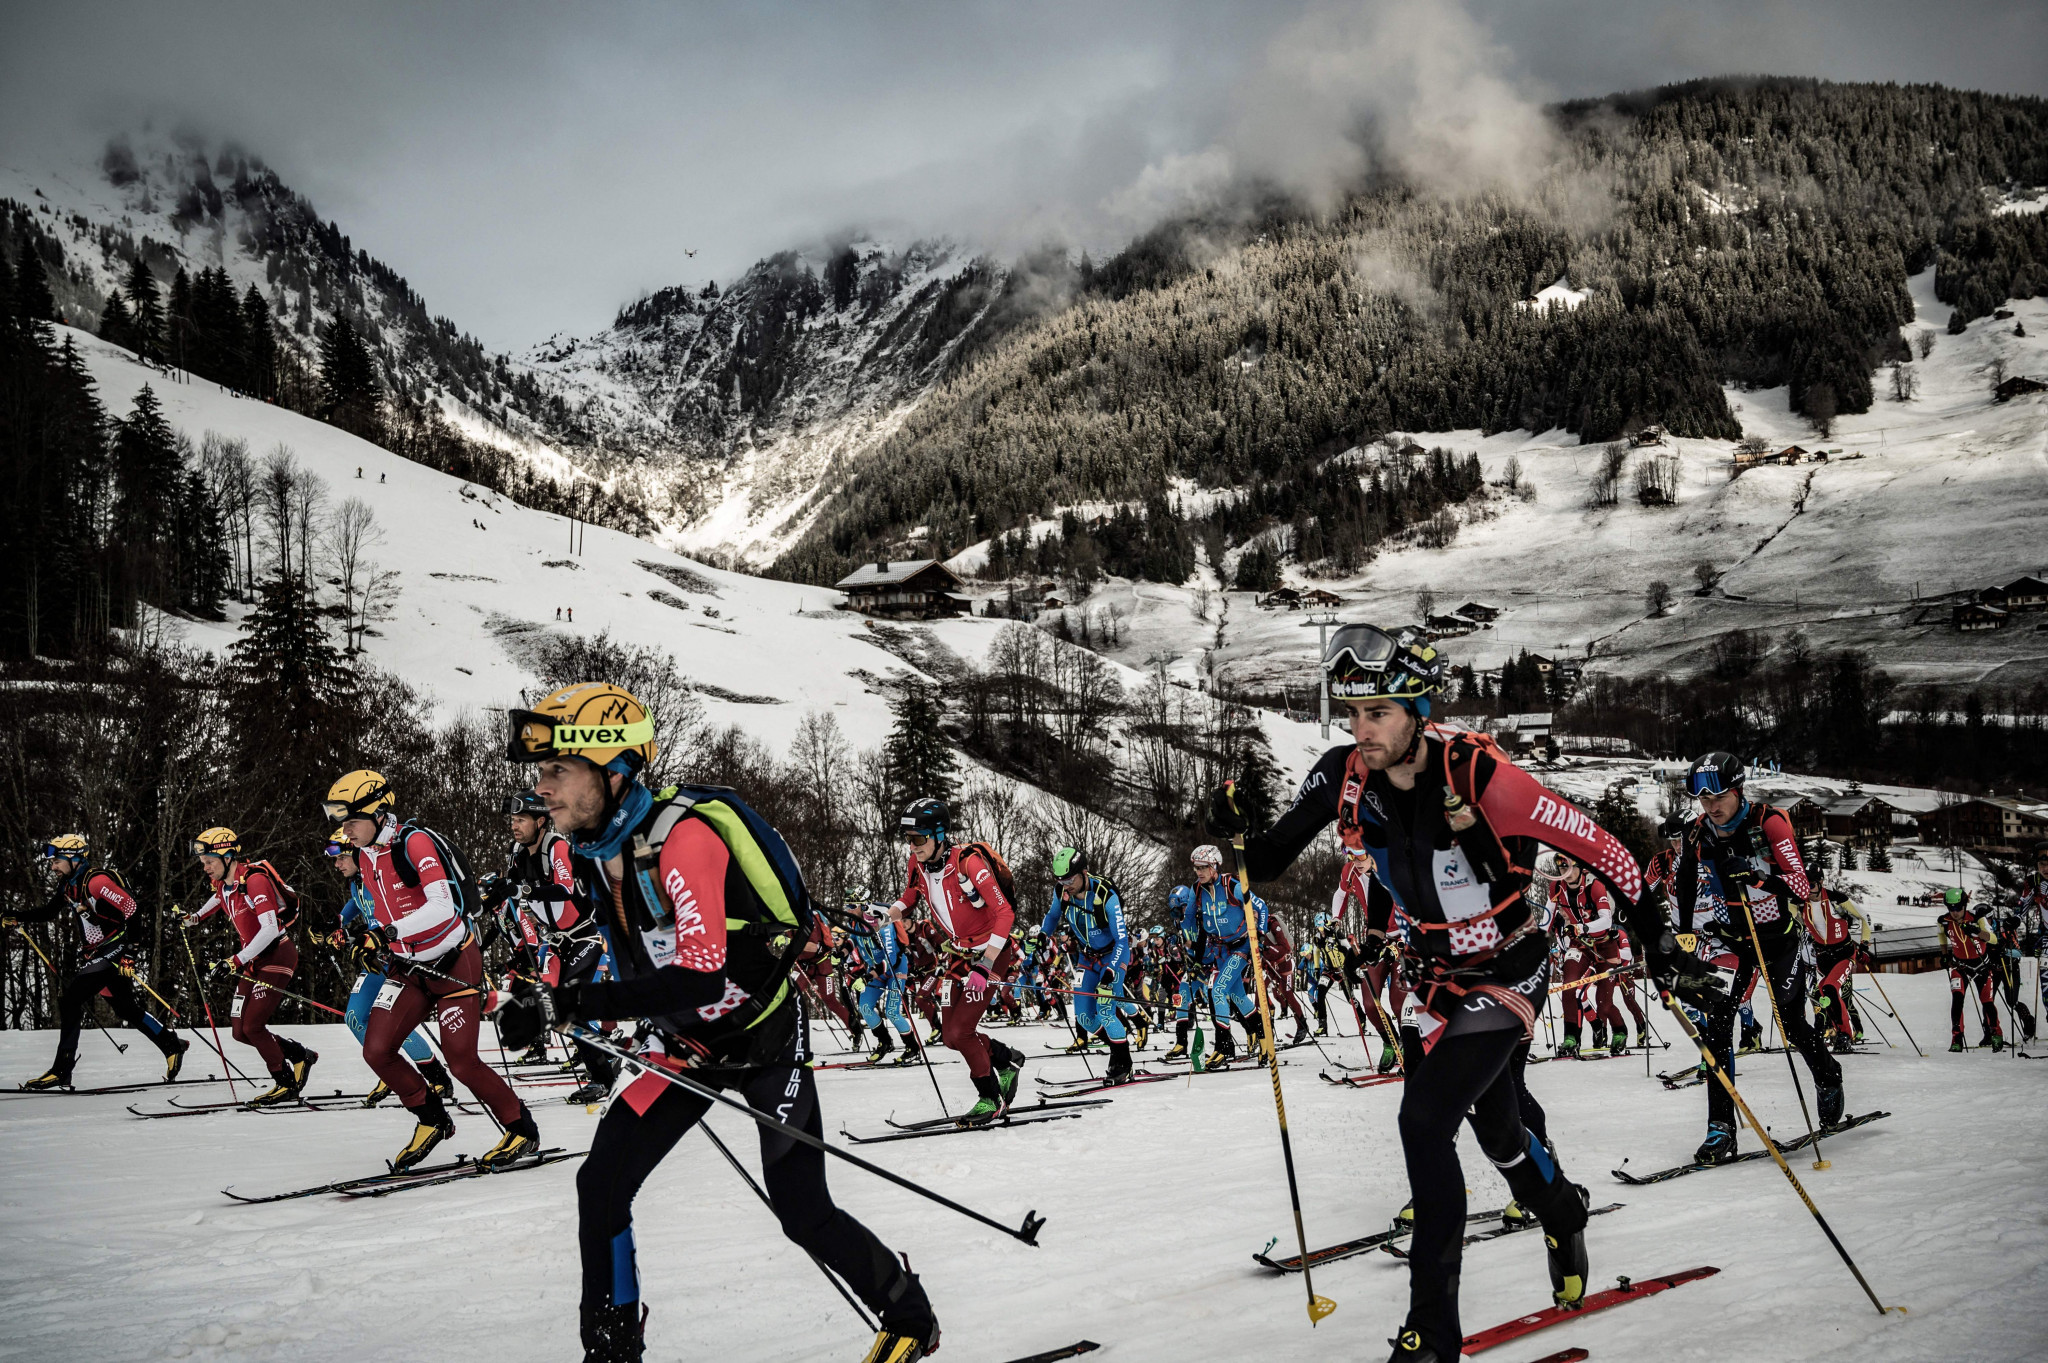 Alexandersson and Anselmet lead the pack prior to ISMF World Cup in Andorra